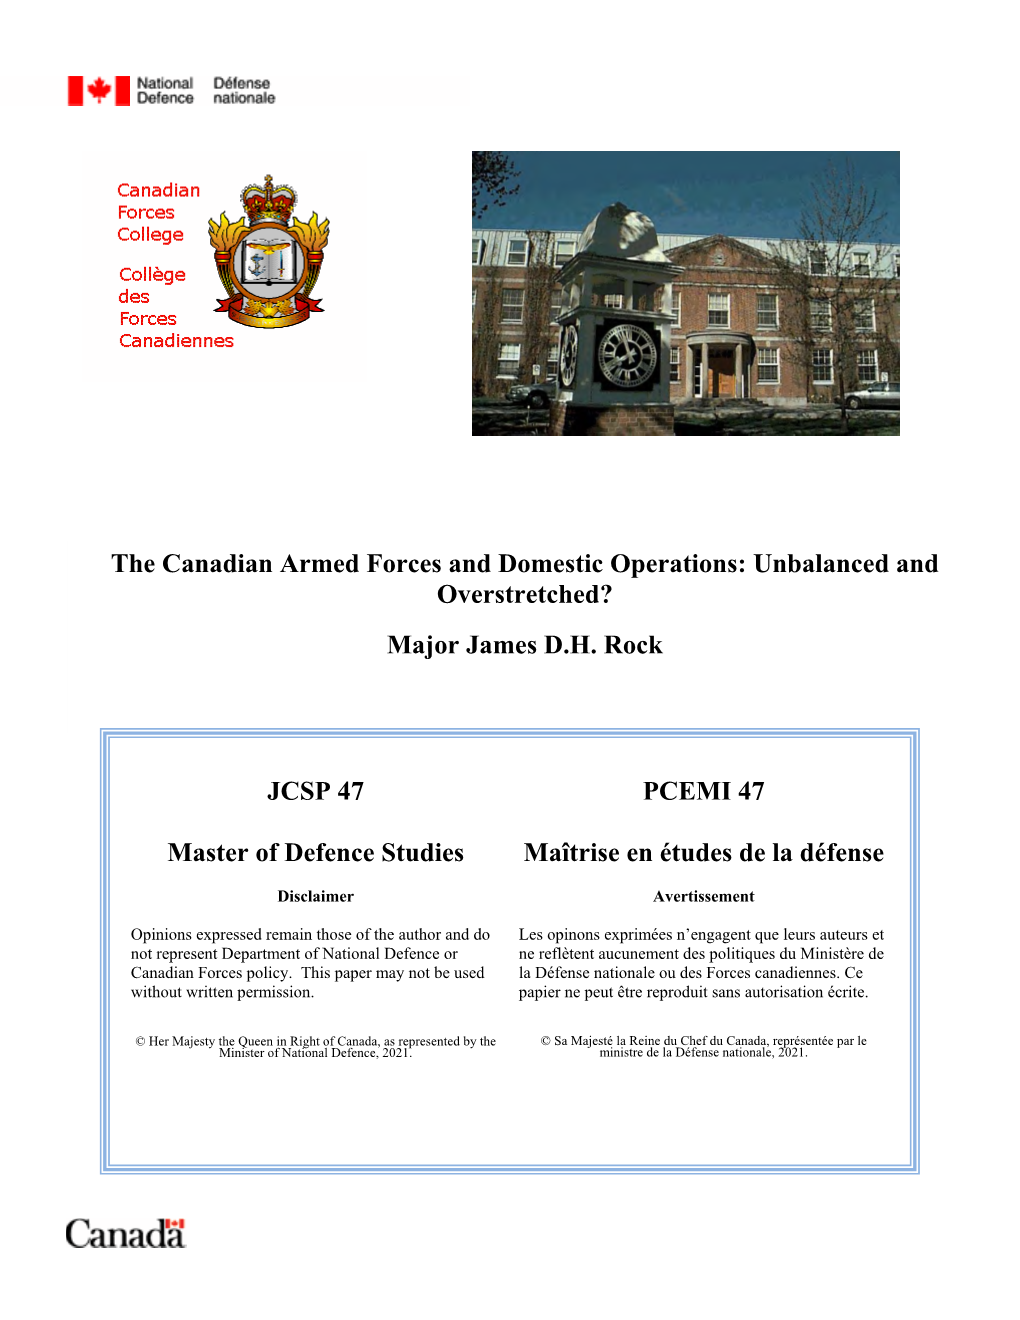 The Canadian Armed Forces and Domestic Operations: Unbalanced and Overstretched? Major James D.H